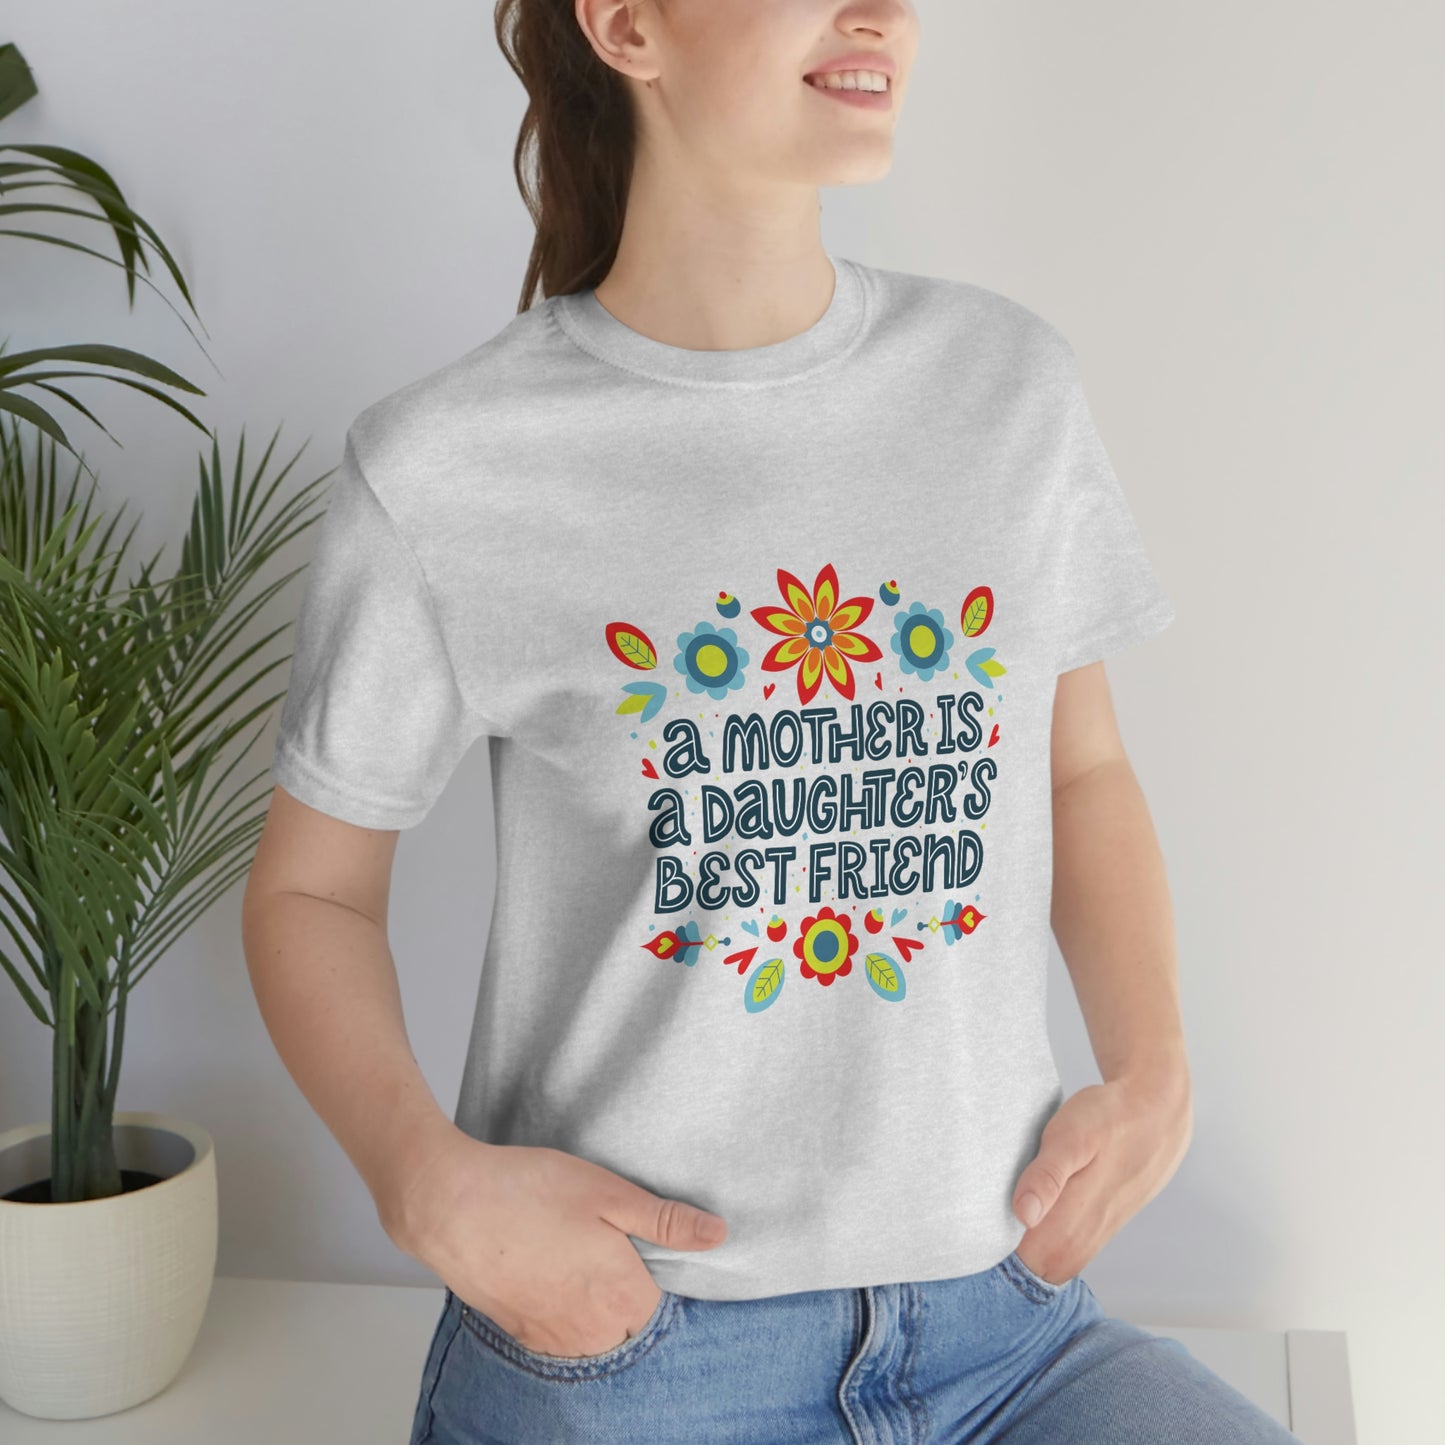 Show your gratitude for mom with this ash colored Best Friend Mom and Daughter T-Shirt. Perfect gift for mom.